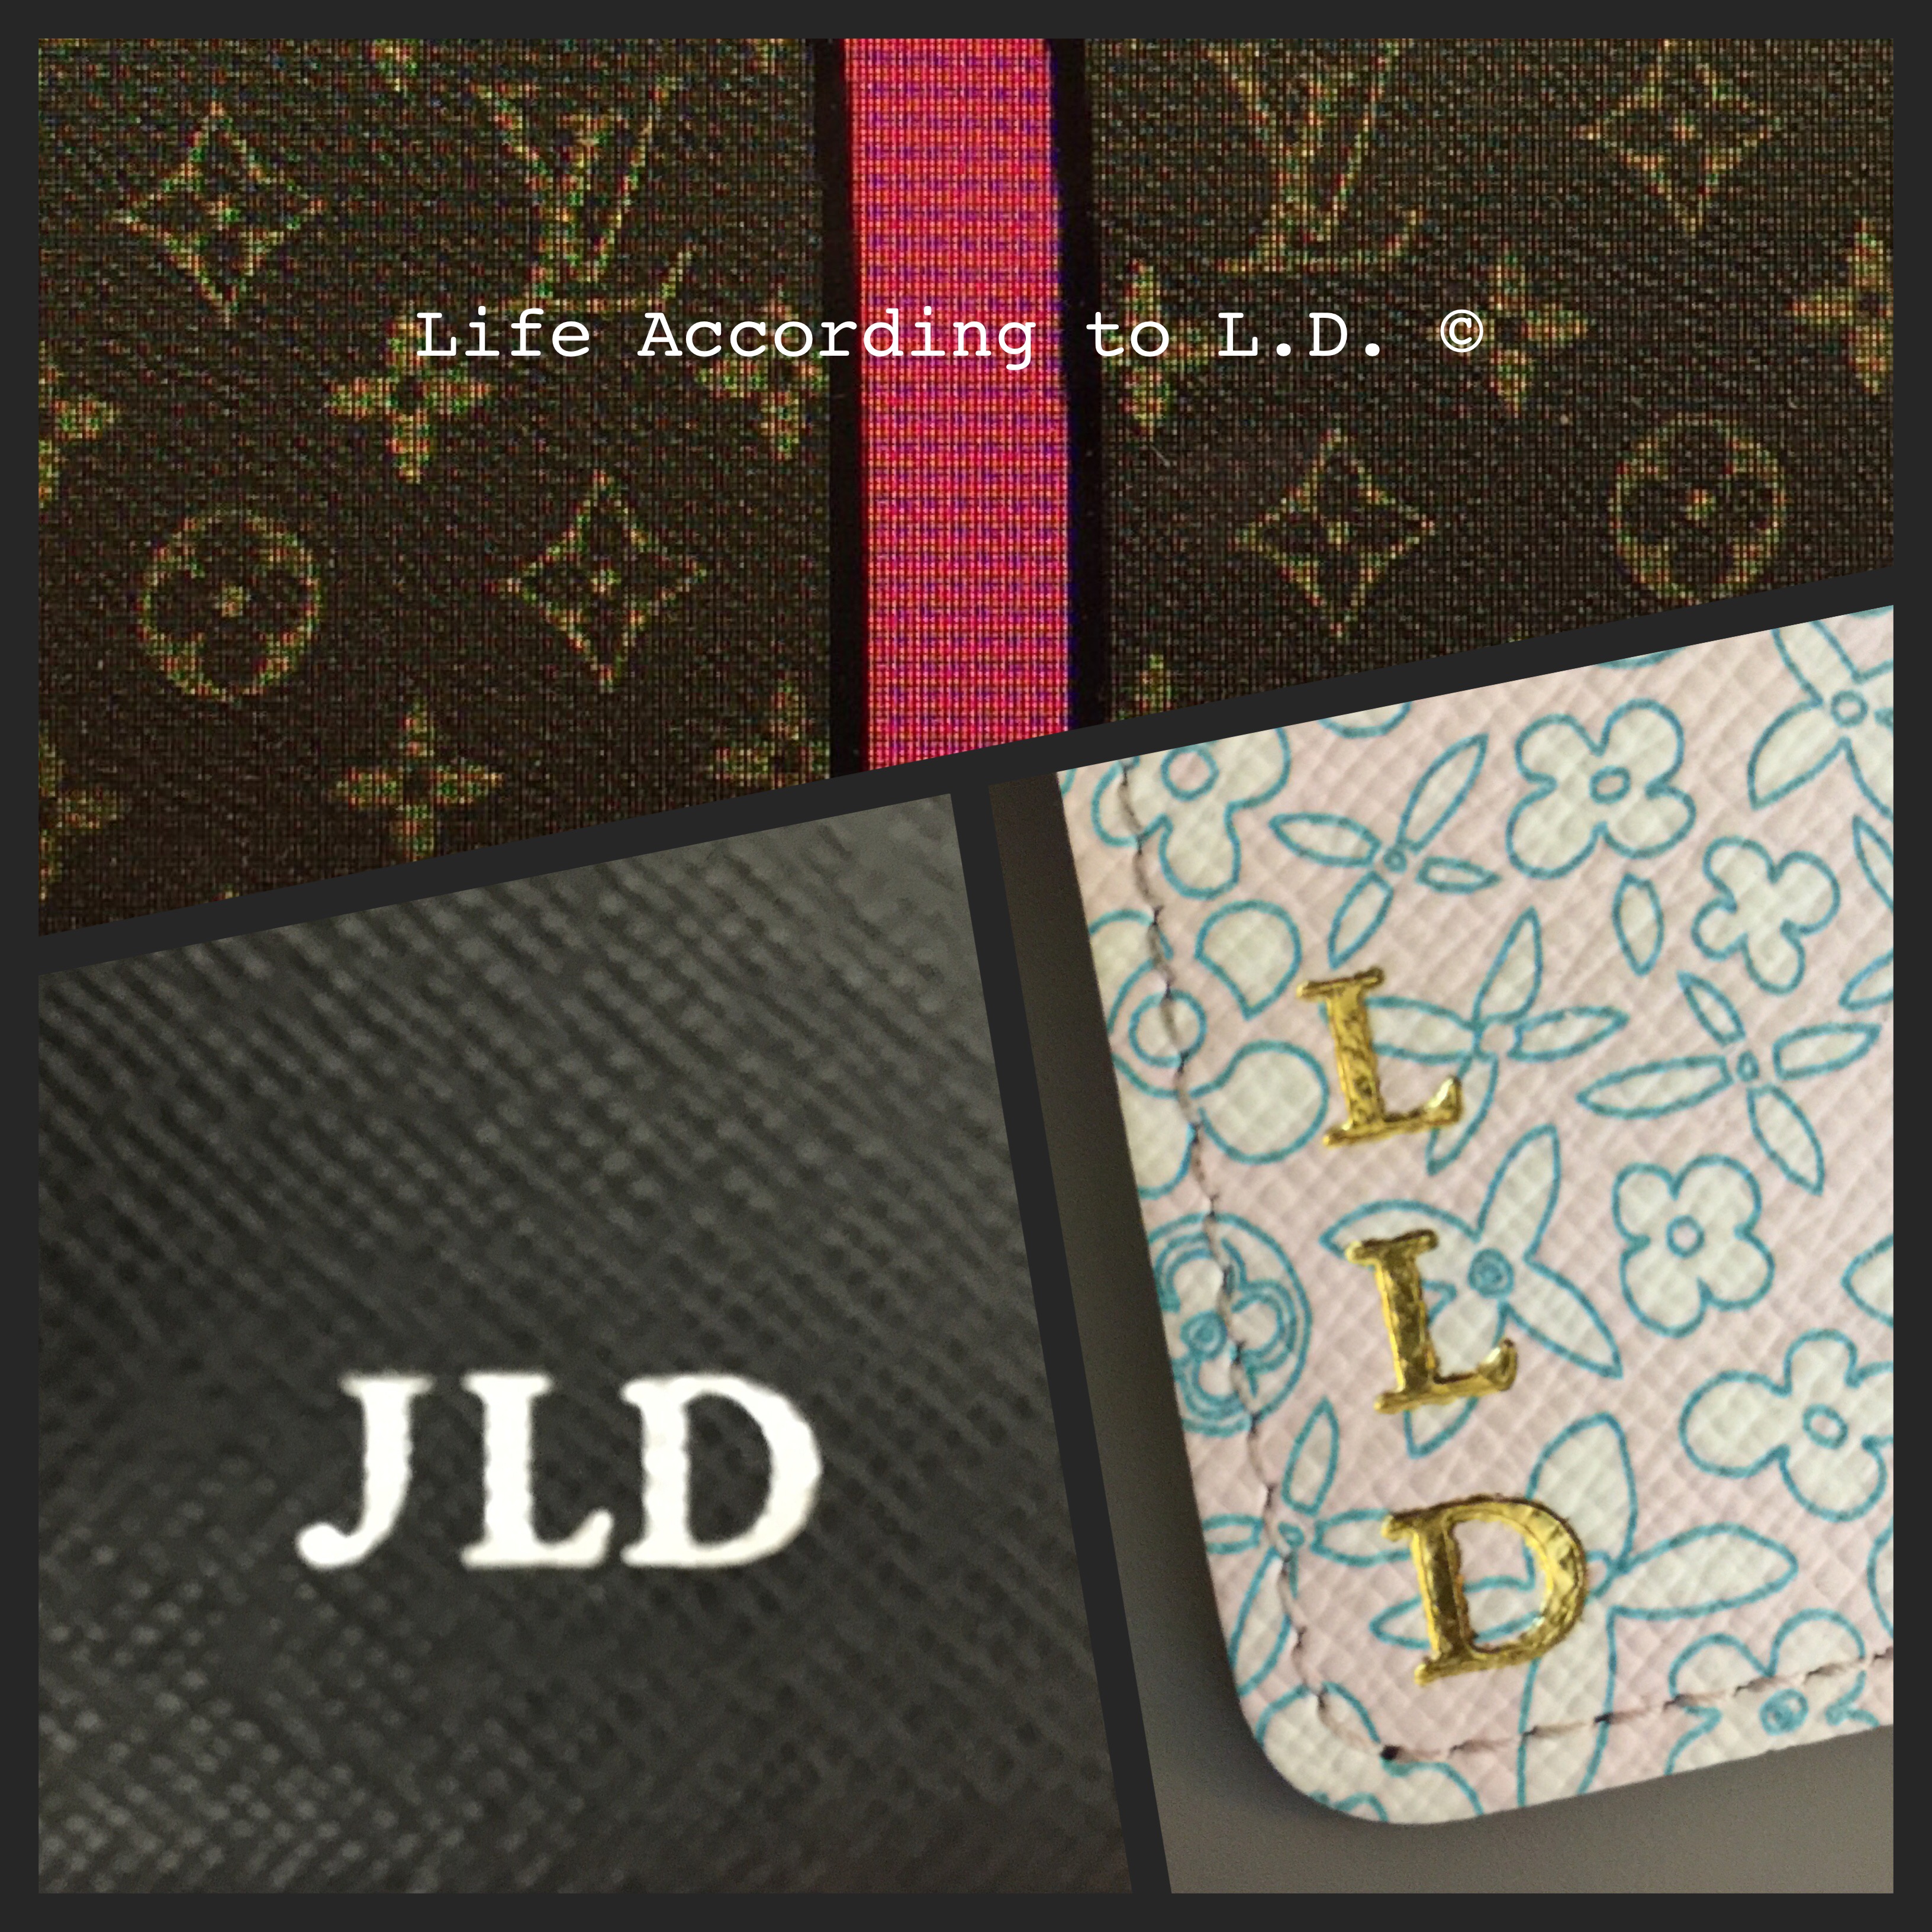 Everyday Life: Louis Vuitton Hot Stamping | life according to ld